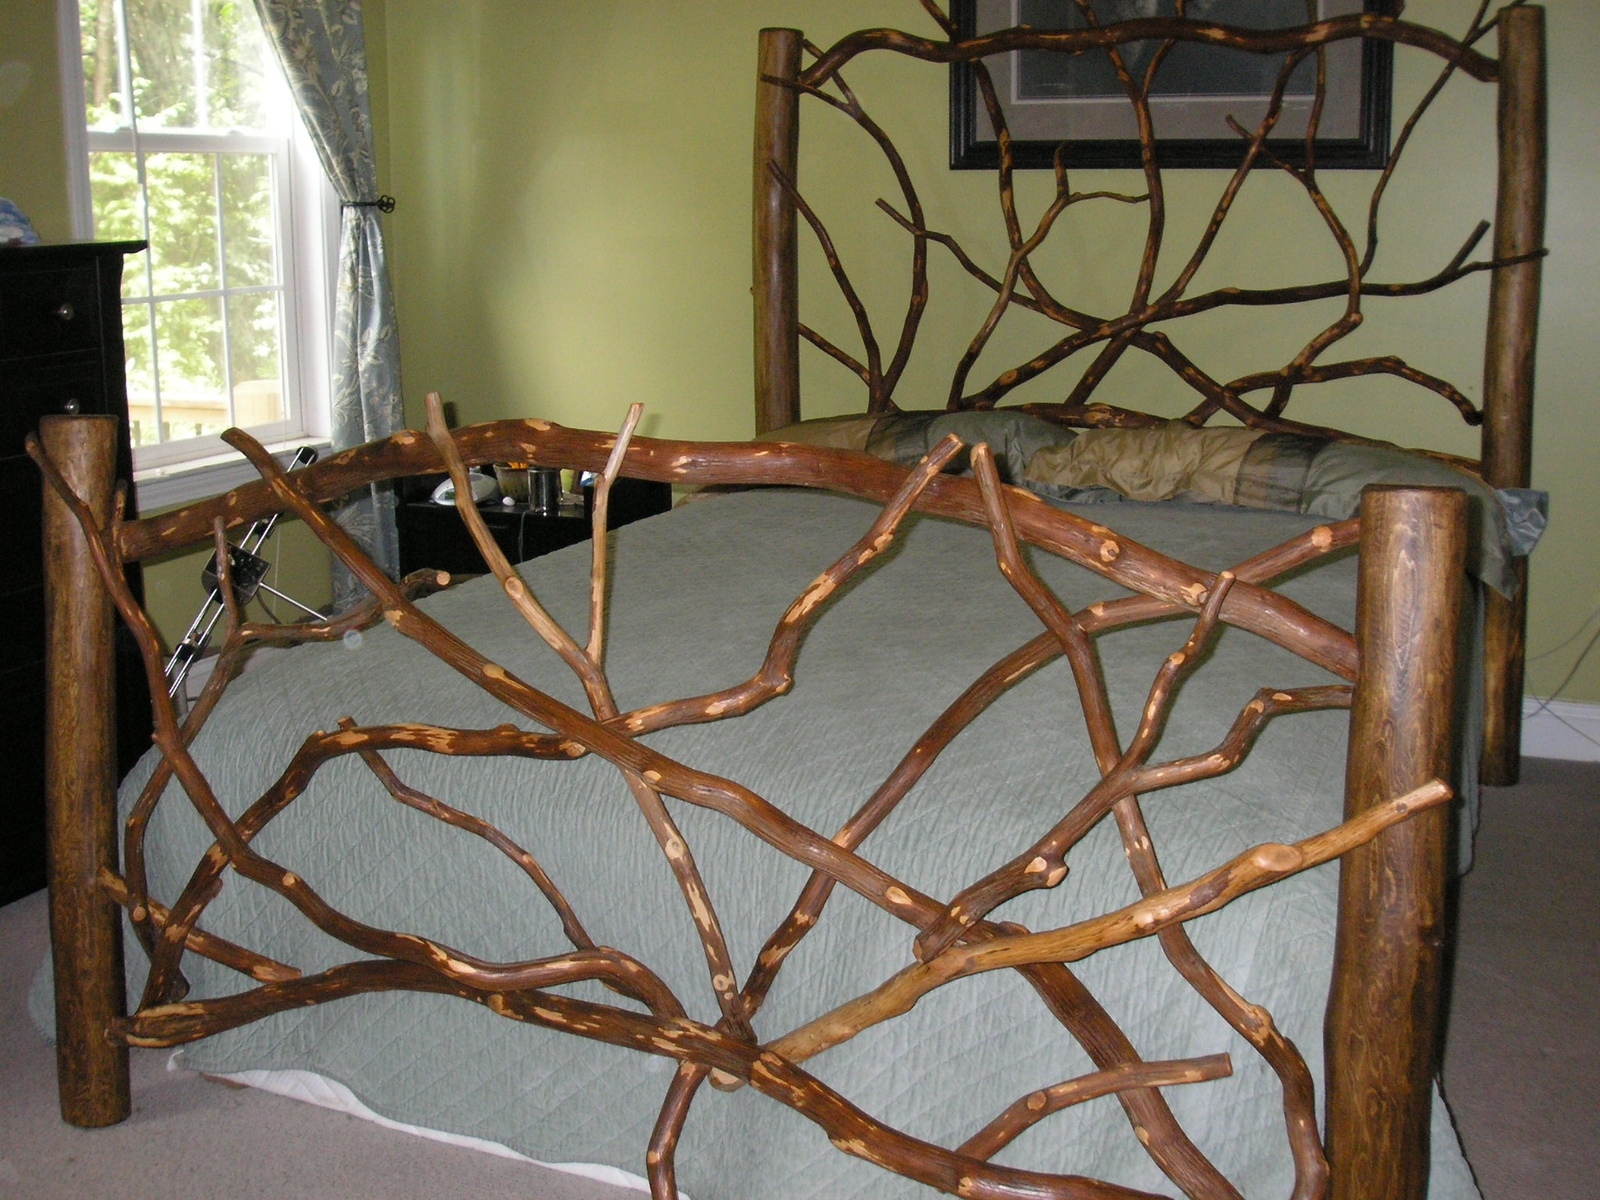 Headboard and Footboard by Rhodo Creations at CustomMade.com